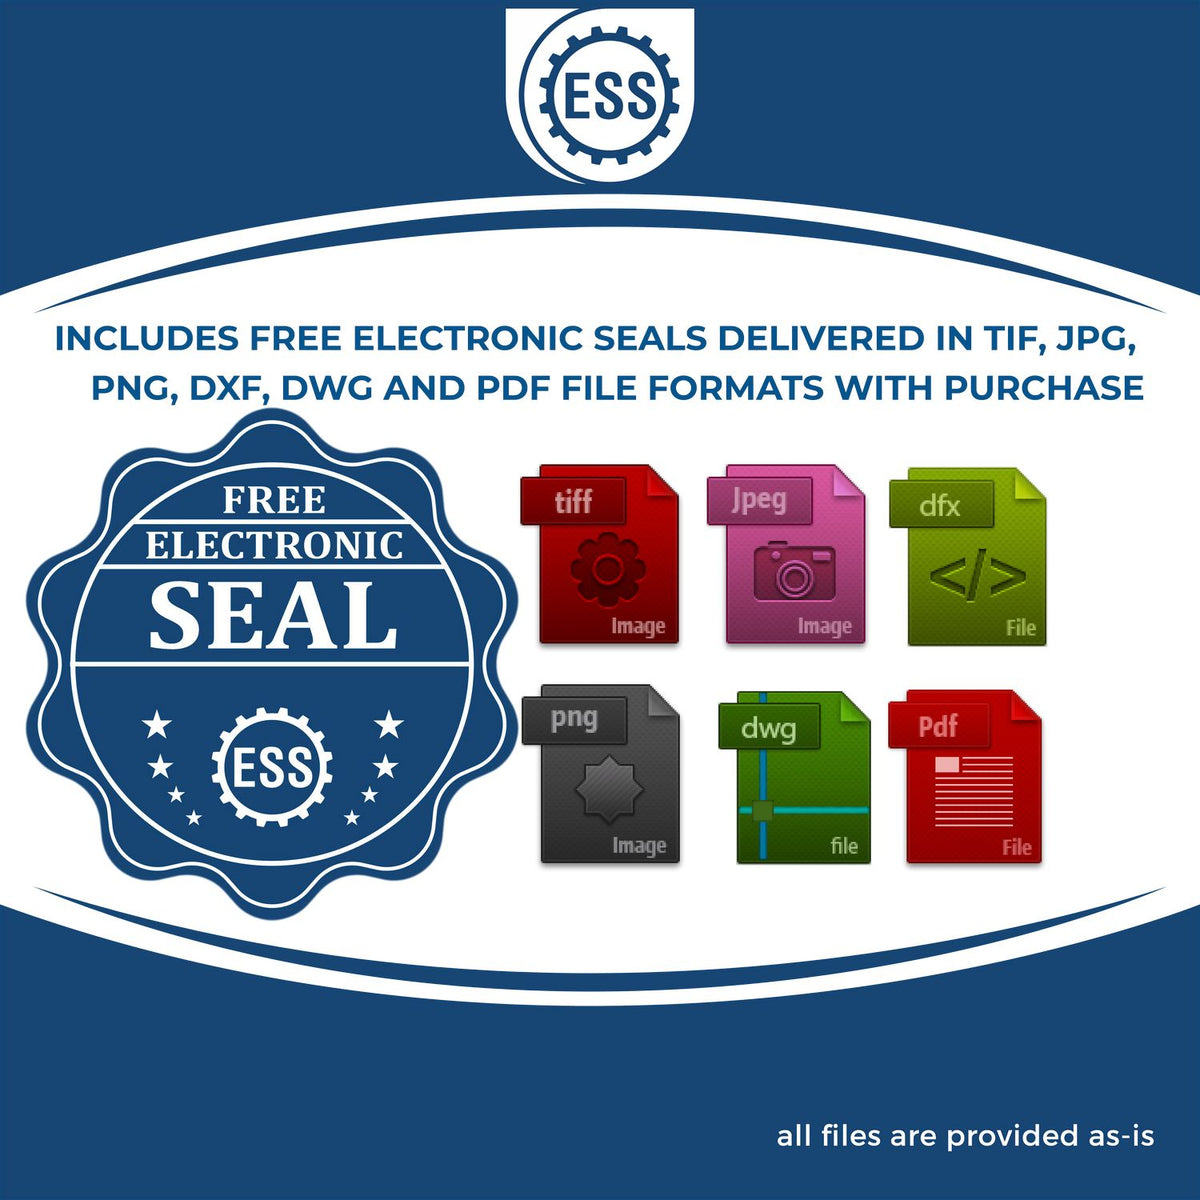 An infographic for the free electronic seal for the Premium MaxLight Pre-Inked New Mexico Engineering Stamp illustrating the different file type icons such as DXF, DWG, TIF, JPG and PNG.